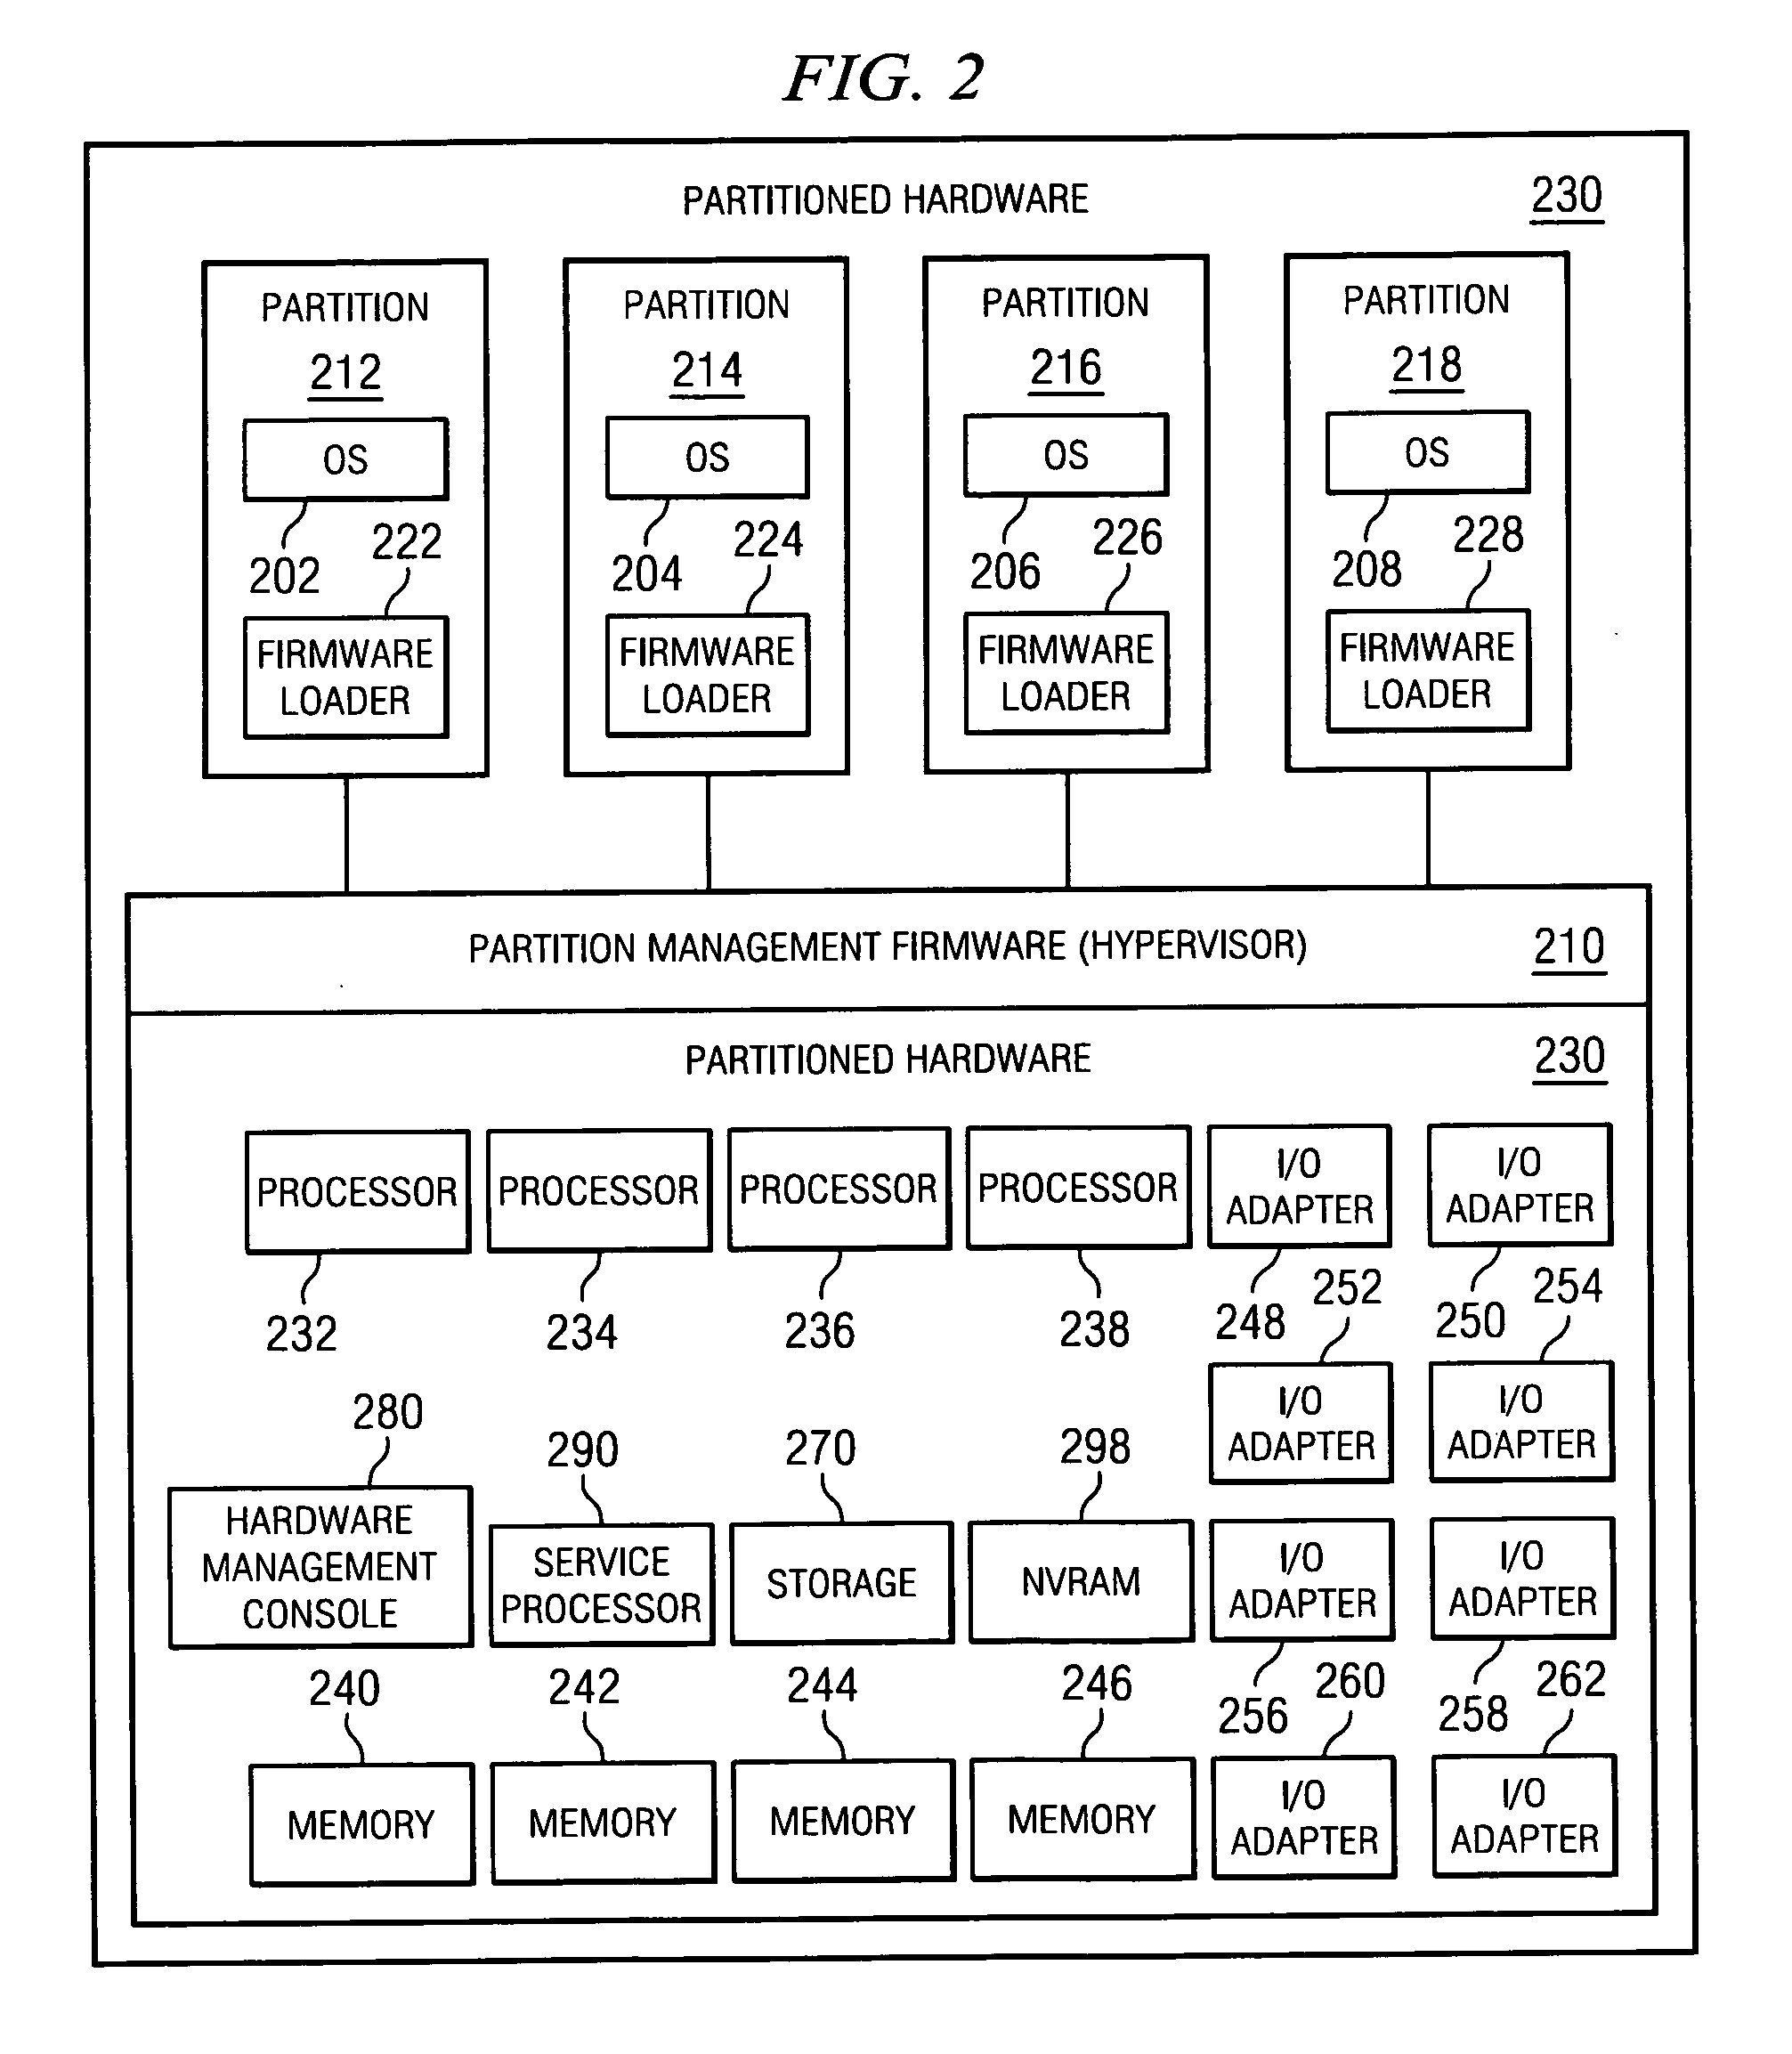 Method for confirming identity of a master node selected to control I/O fabric configuration in a multi-host environment